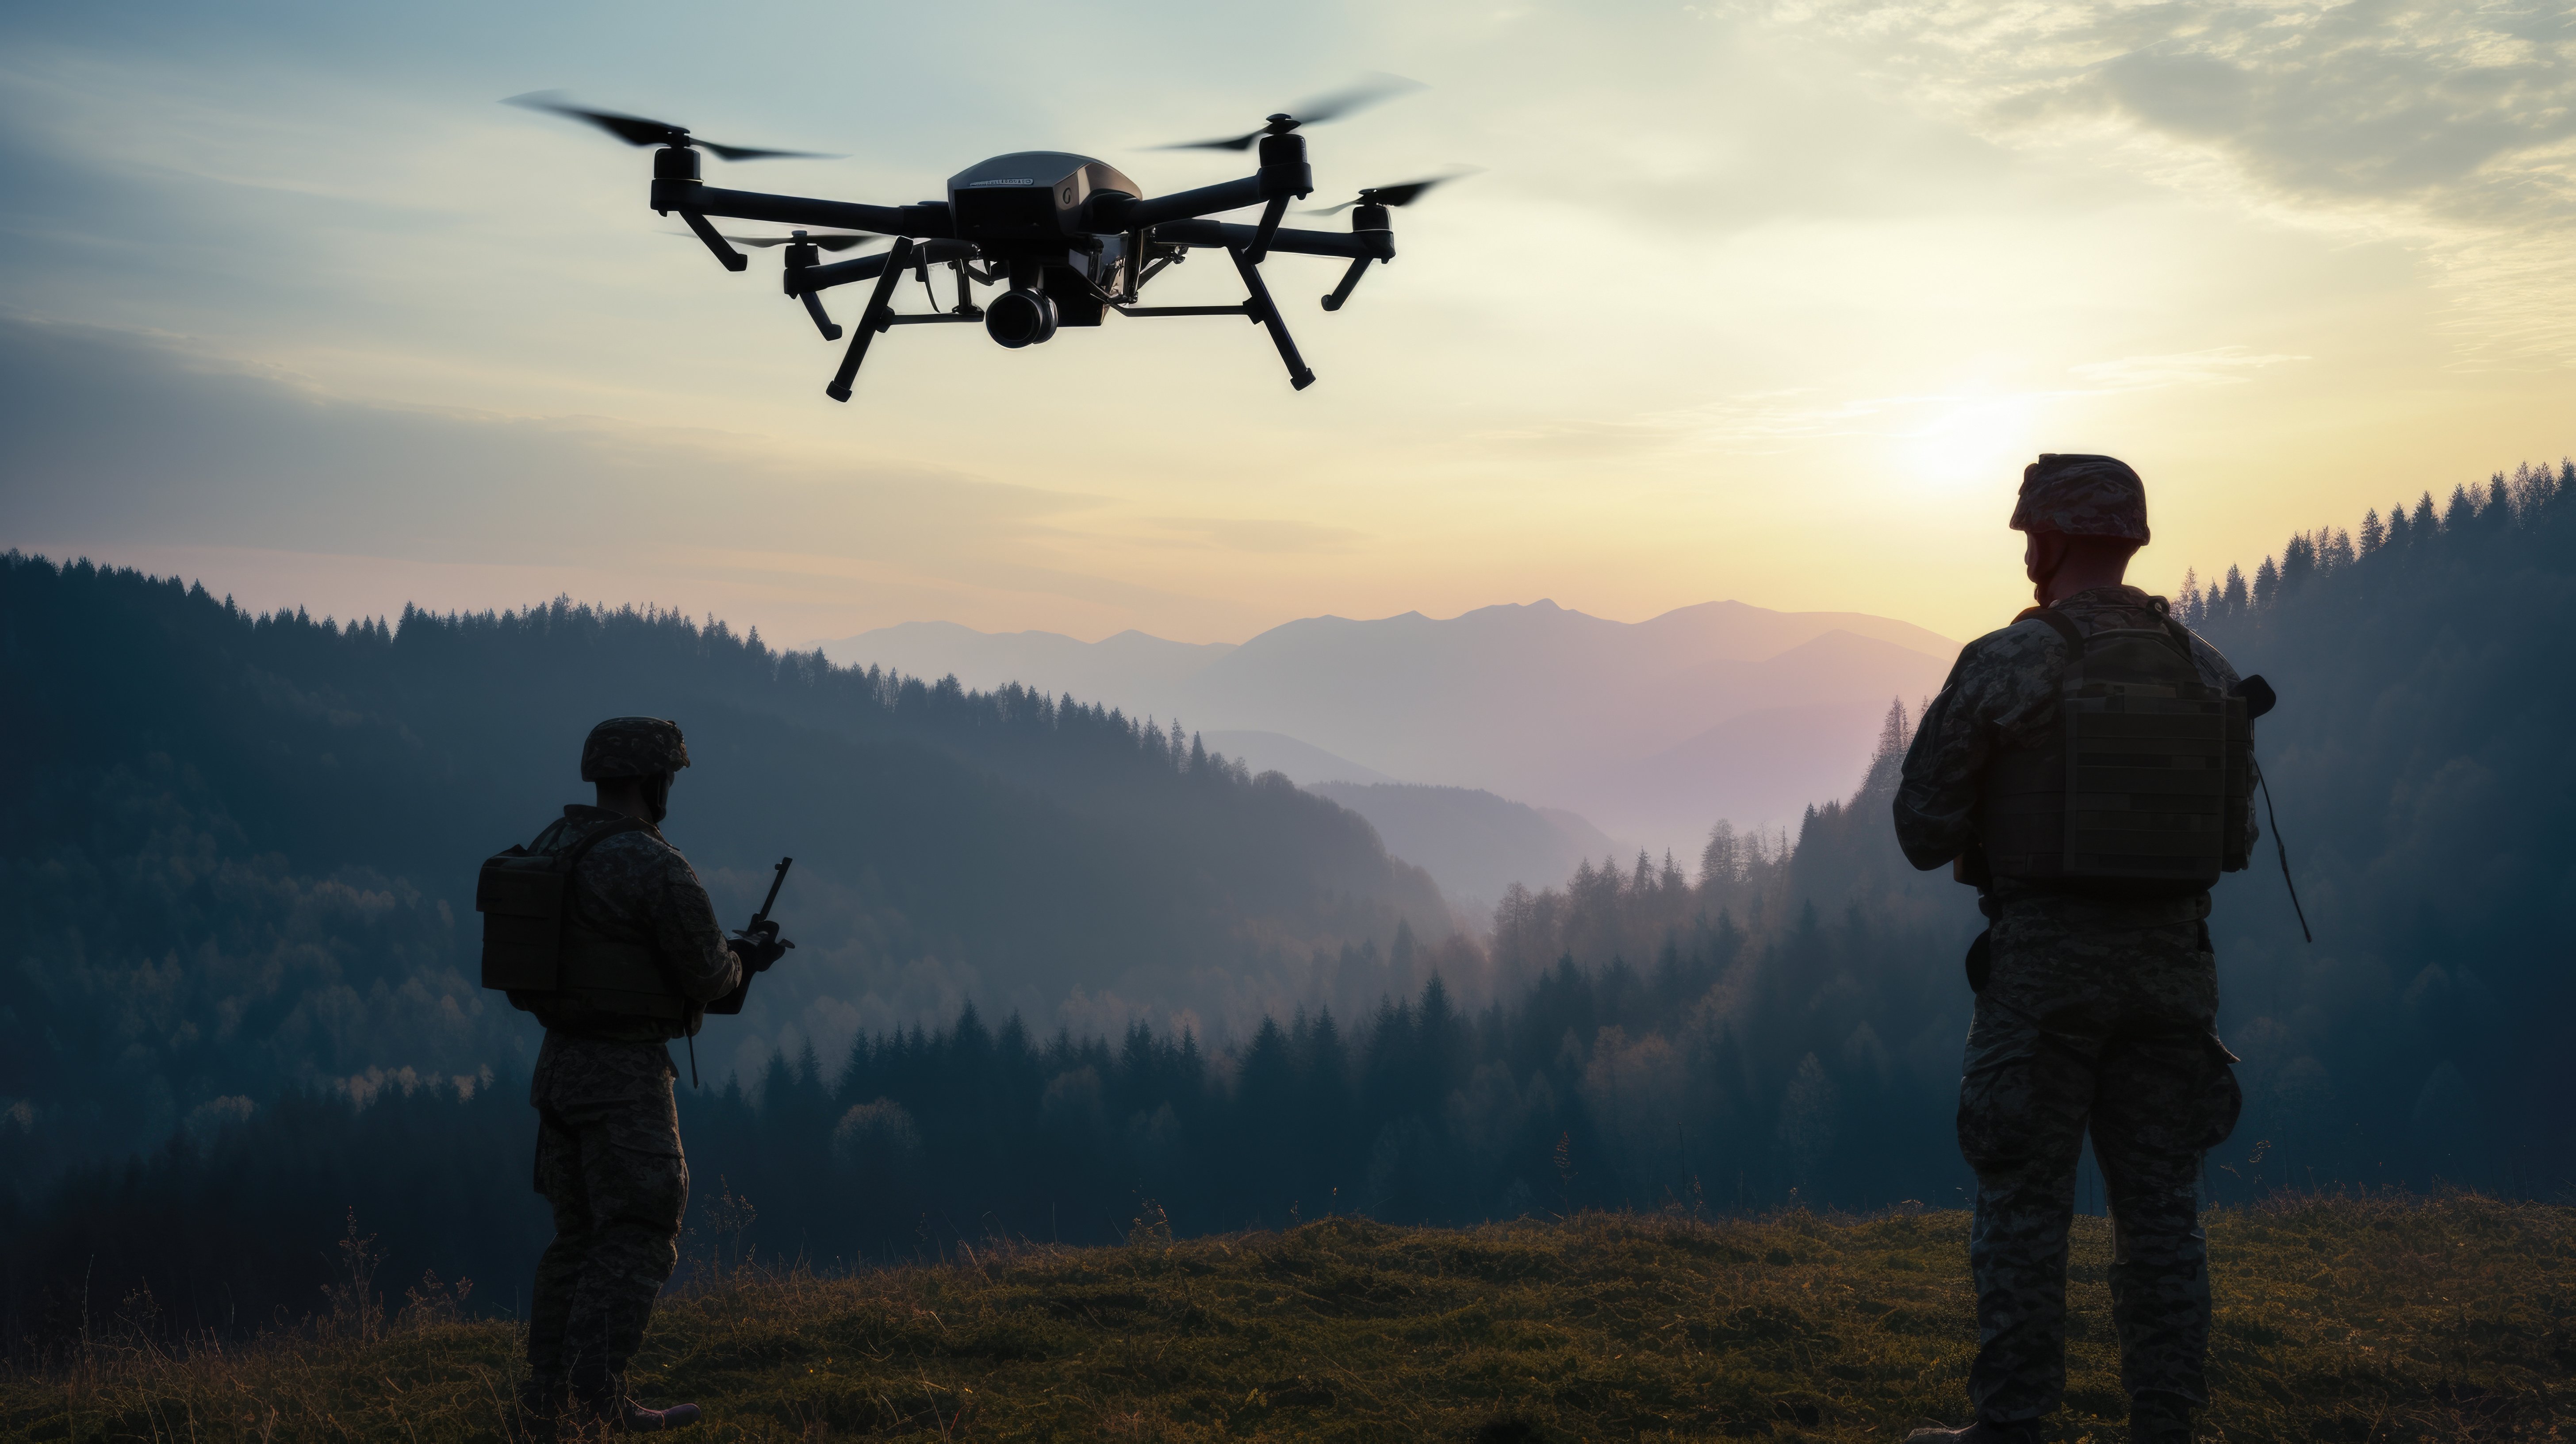 Two military personnel operate a small drone on a hill. Valleys and sunset in background.